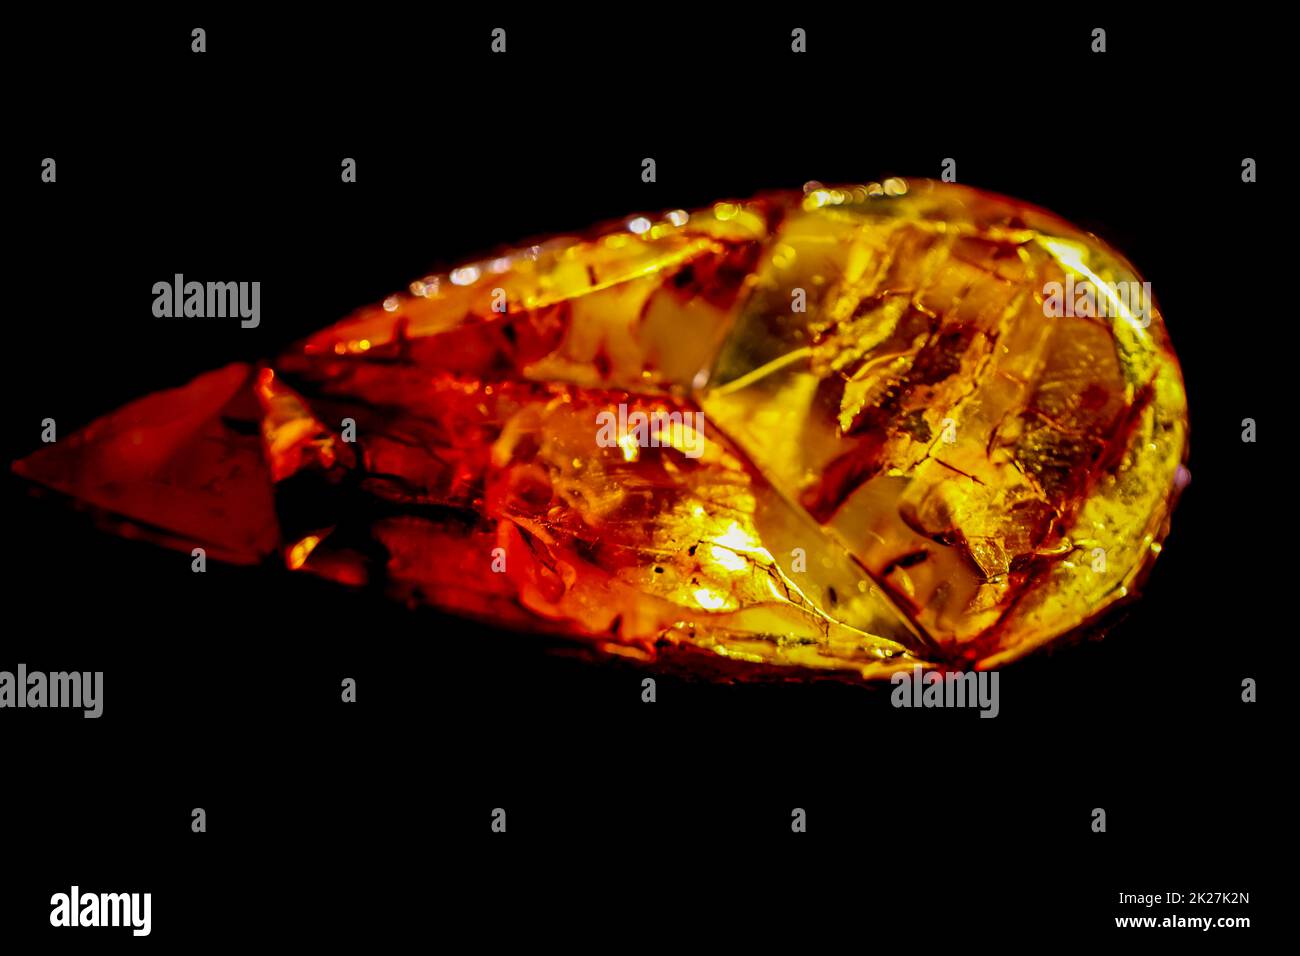 Amber in its natural form and warm color. Amber is often made into jewelry. Stock Photo